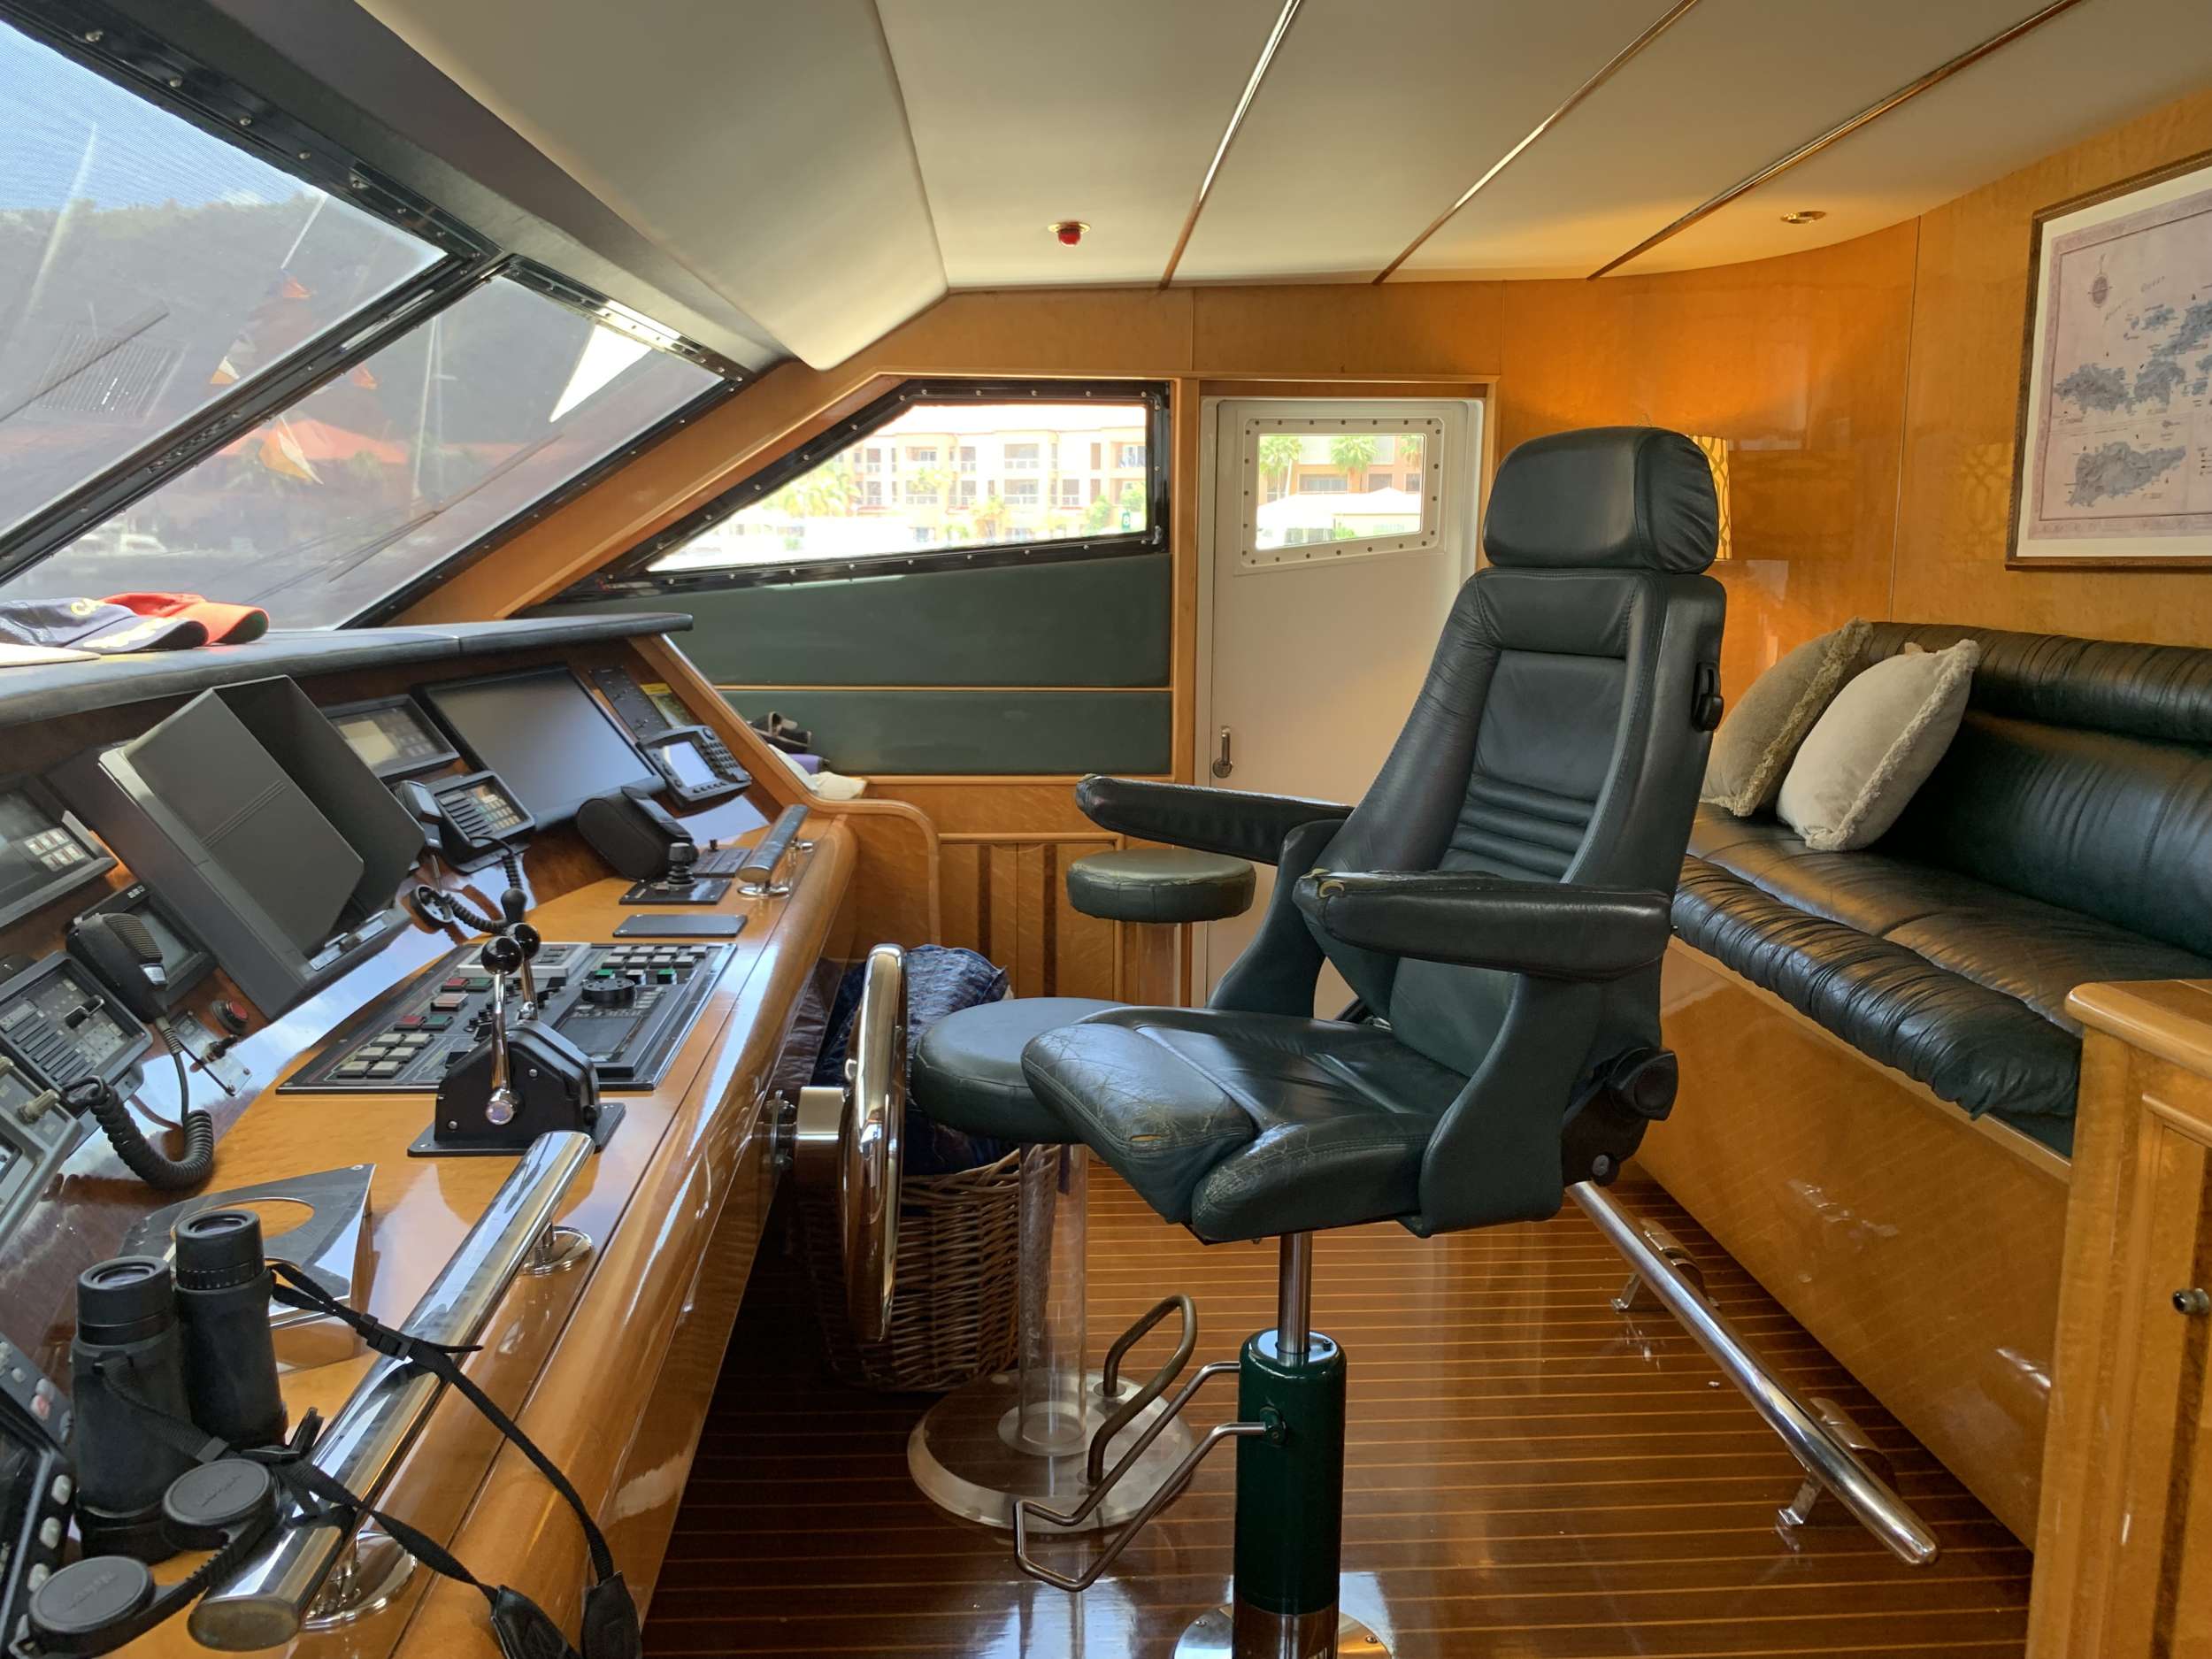 2 helms -  the interior helm couch allows front row seating